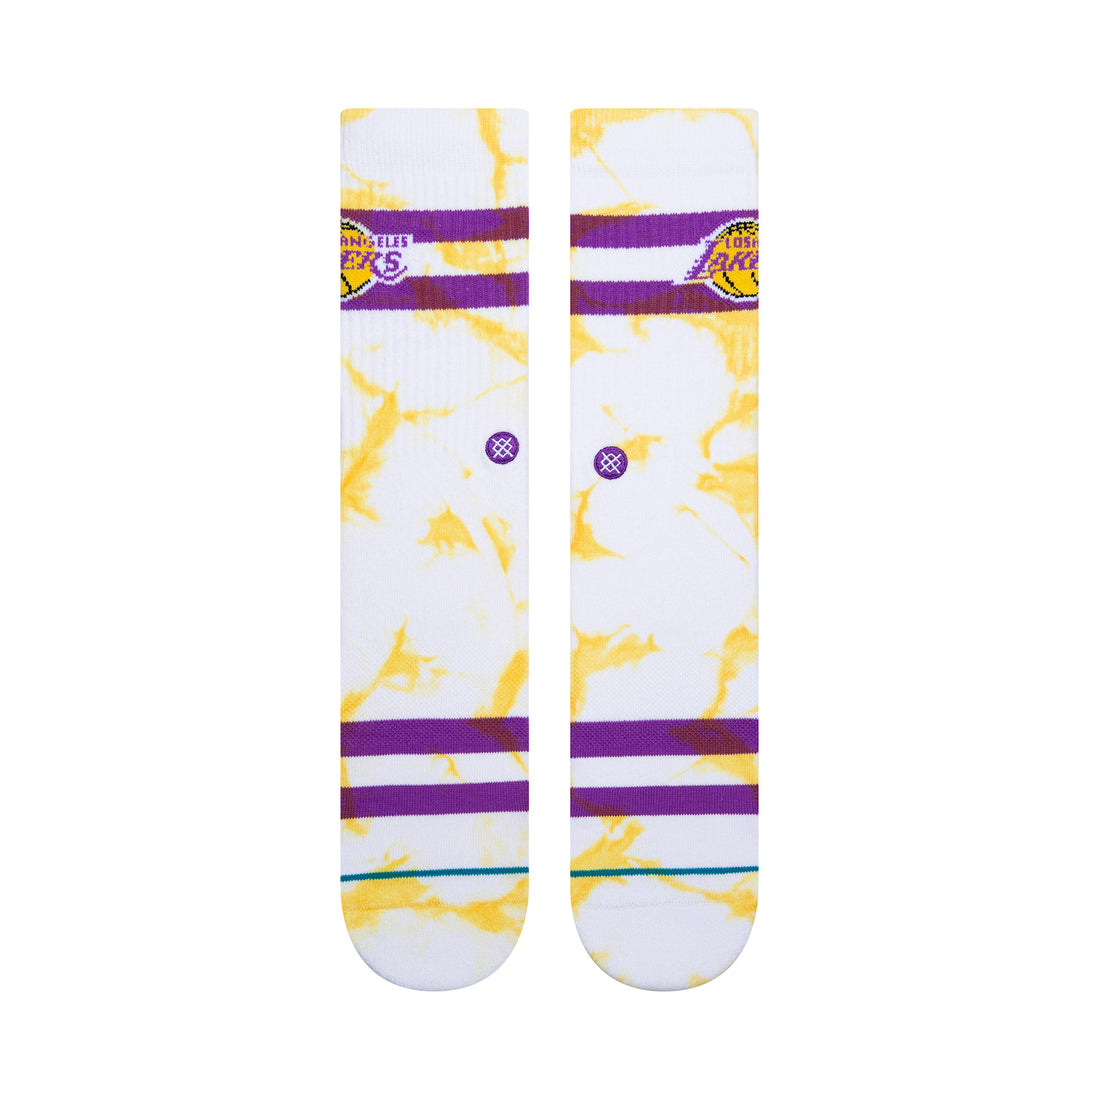 Stance x NBA "Lakers Dyed" Socks (Gold)